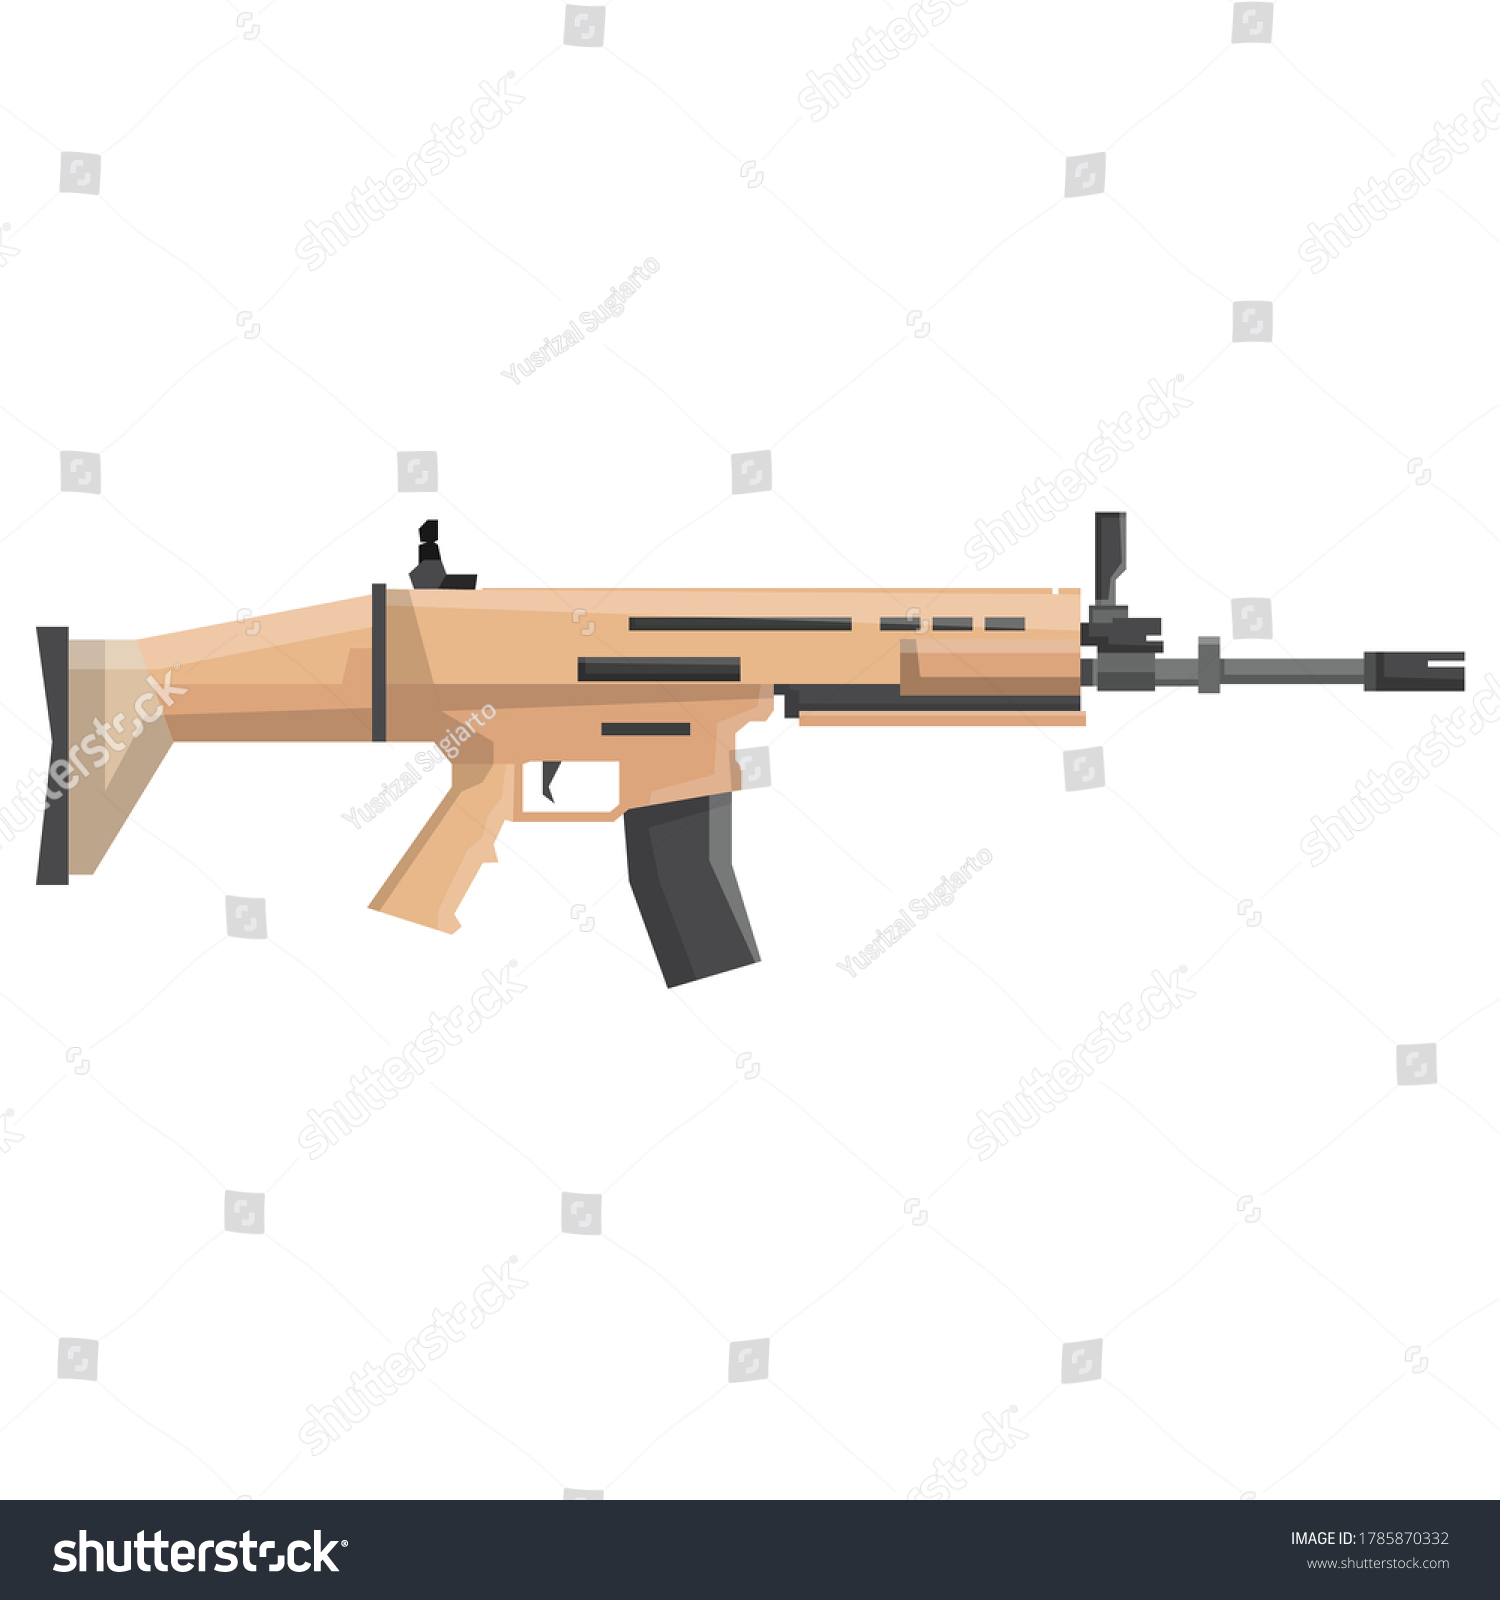 Scarl Weapon Illustration Pubg Weapon Illustration Stock Vector Royalty Free